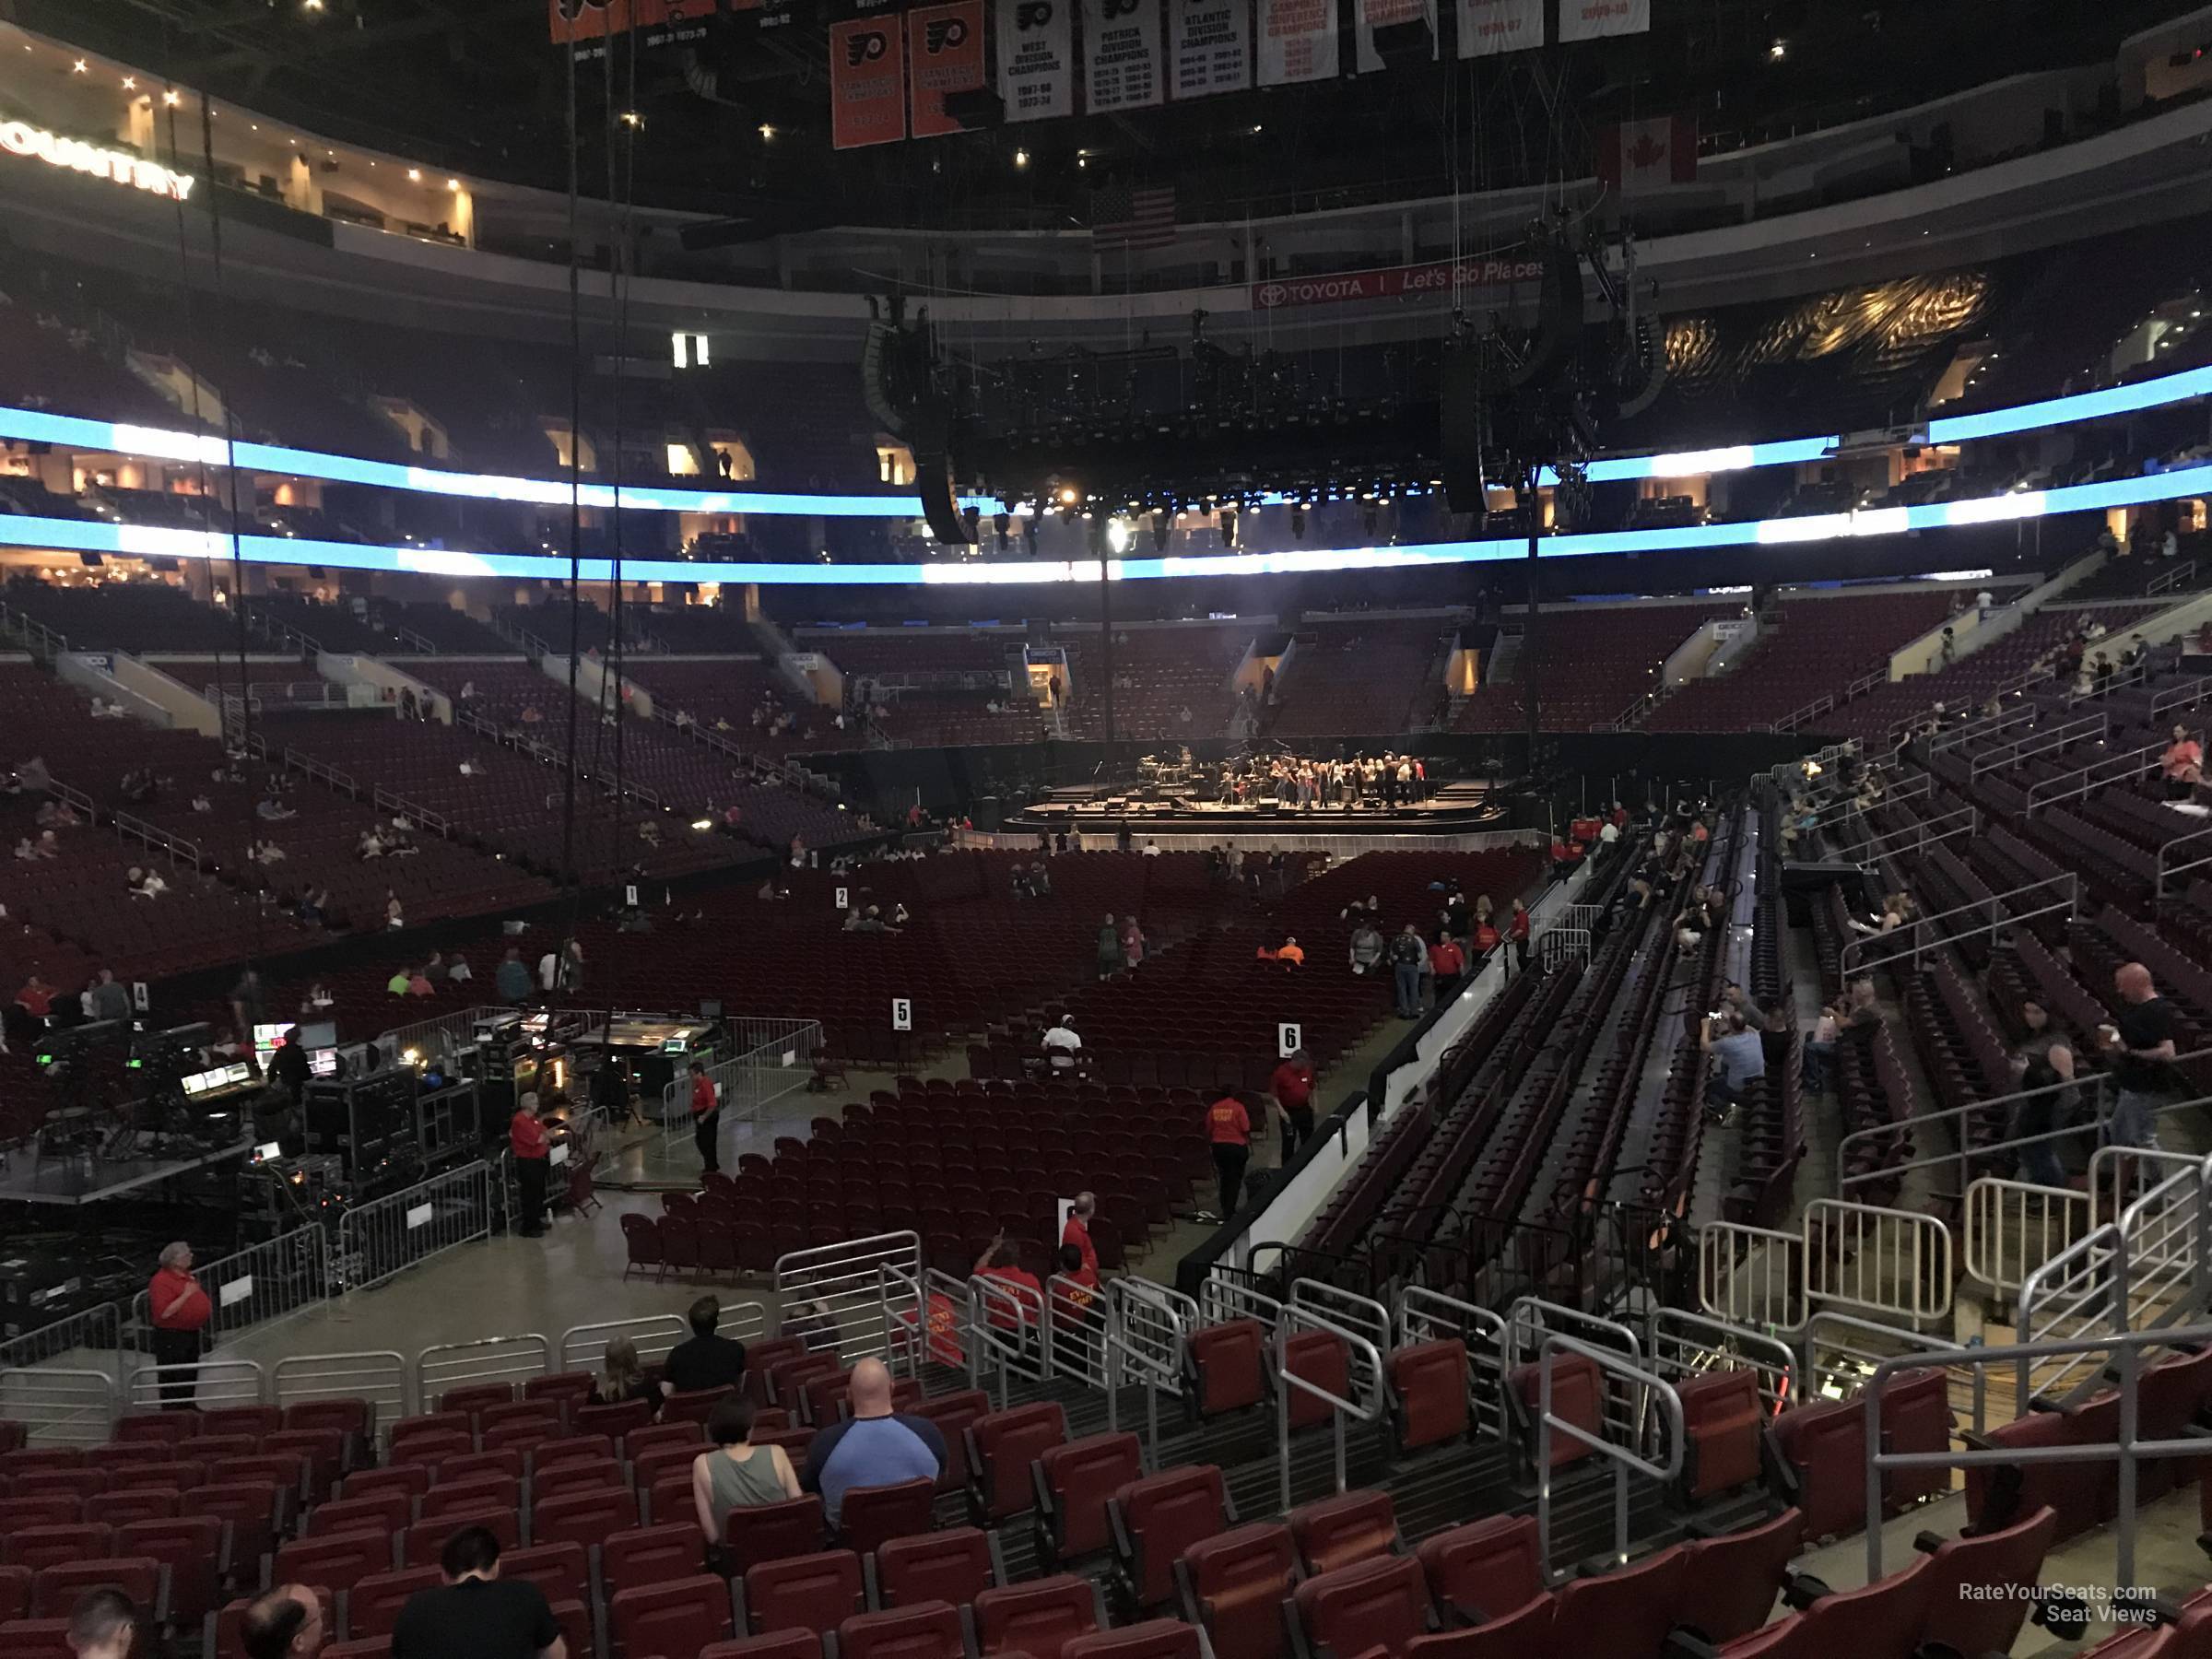 section 108 seat view  for concert - wells fargo center